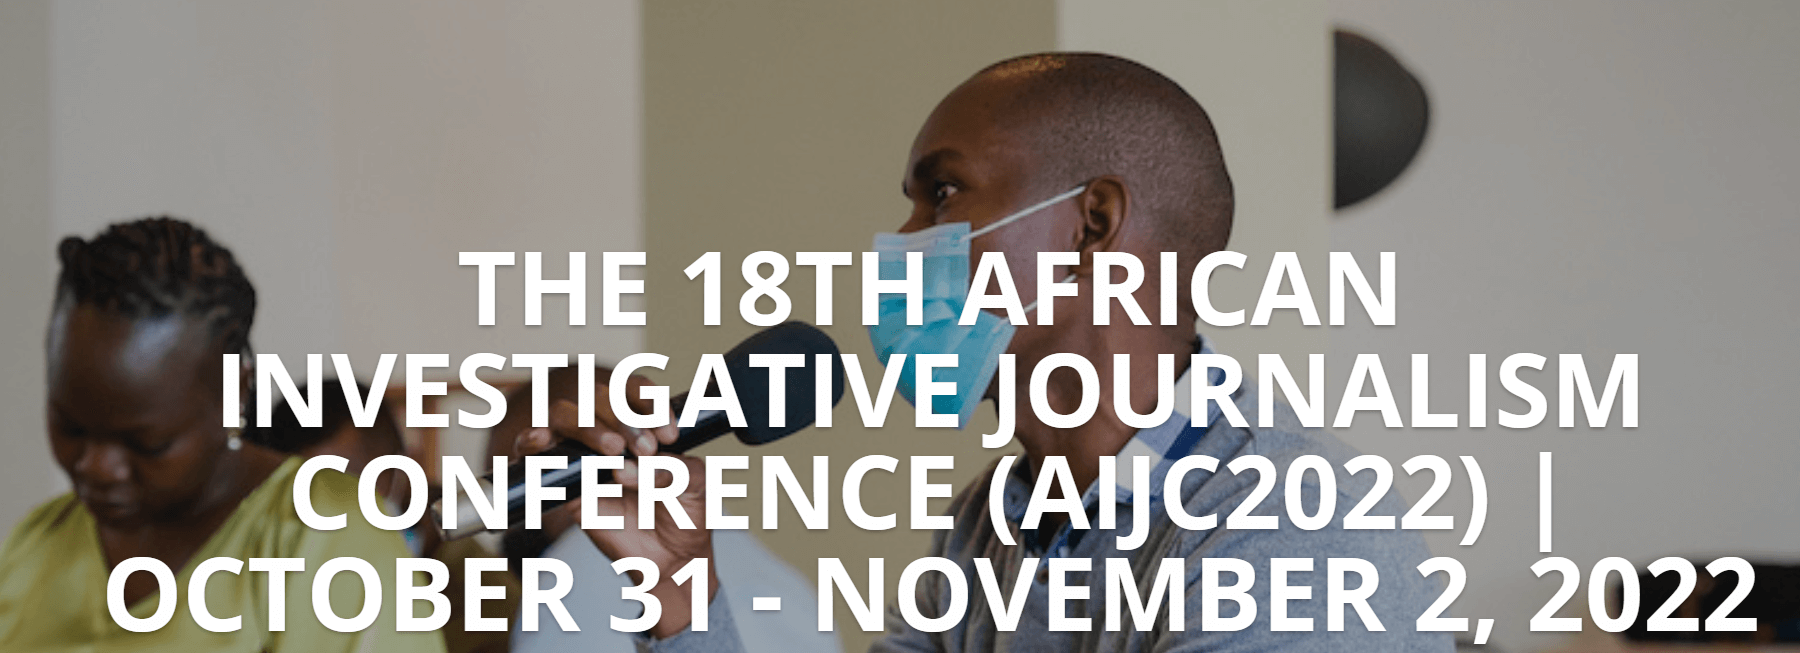 African Investigative Journalism Conference Fellowships 2022